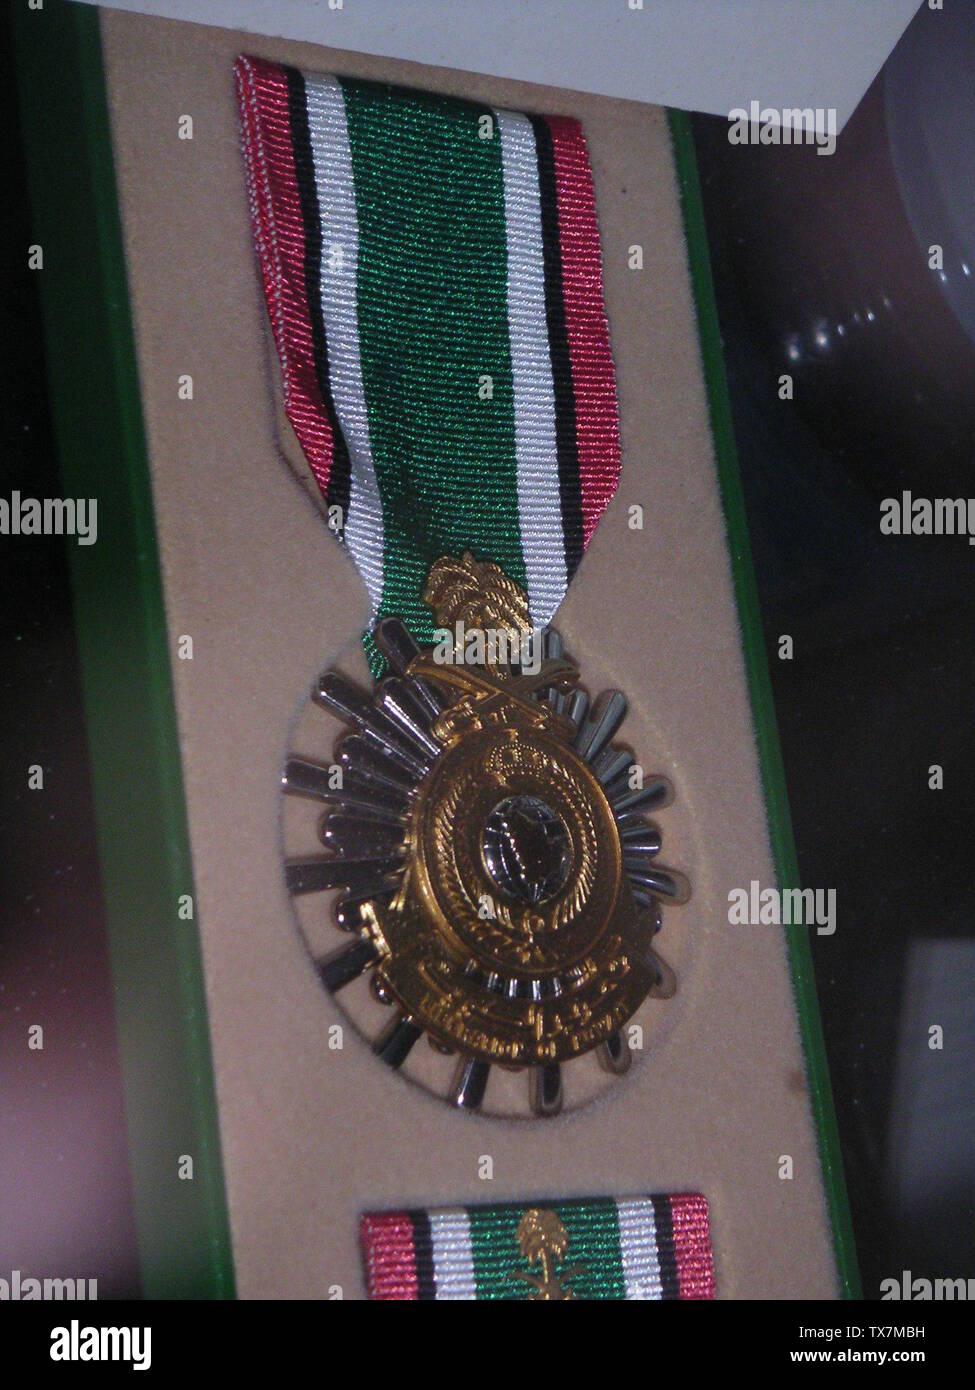 A photograph of the Kuwait Liberation Medal, a military decoration given to members of the U.S. military for service during the Persian Gulf War. Photograph taken by me in the Museum of Florida's Military in St. Augustine, Florida on August 7, 2004. Released into public domain.; 3 September 2004 (original upload date); Transferred from en.pedia to Commons by Premeditated Chaos using CommonsHelper.; Neutrality at English pedia; Stock Photo